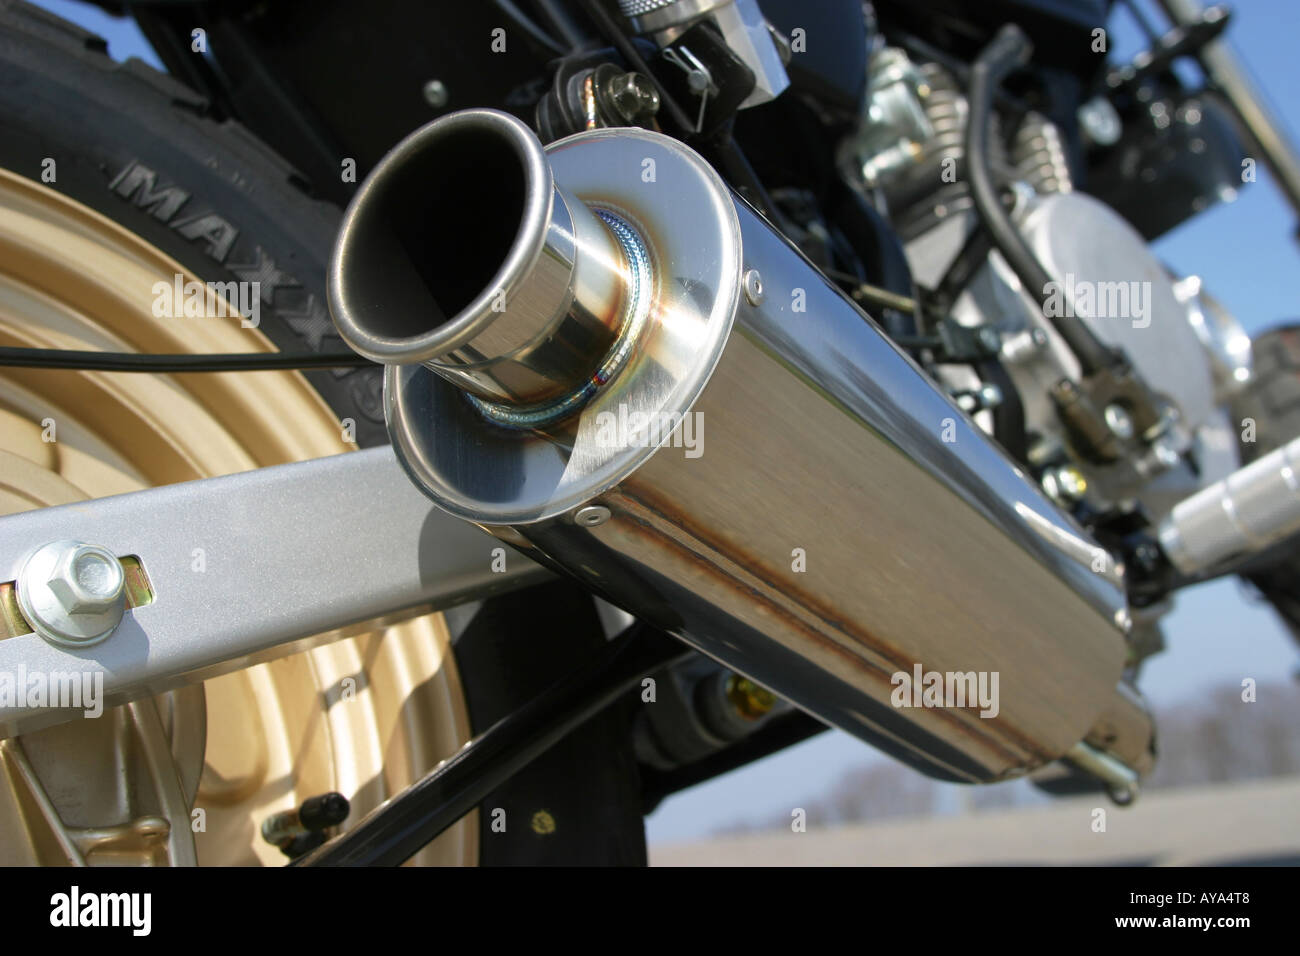 Exhaust of a motor cycle Stock Photo